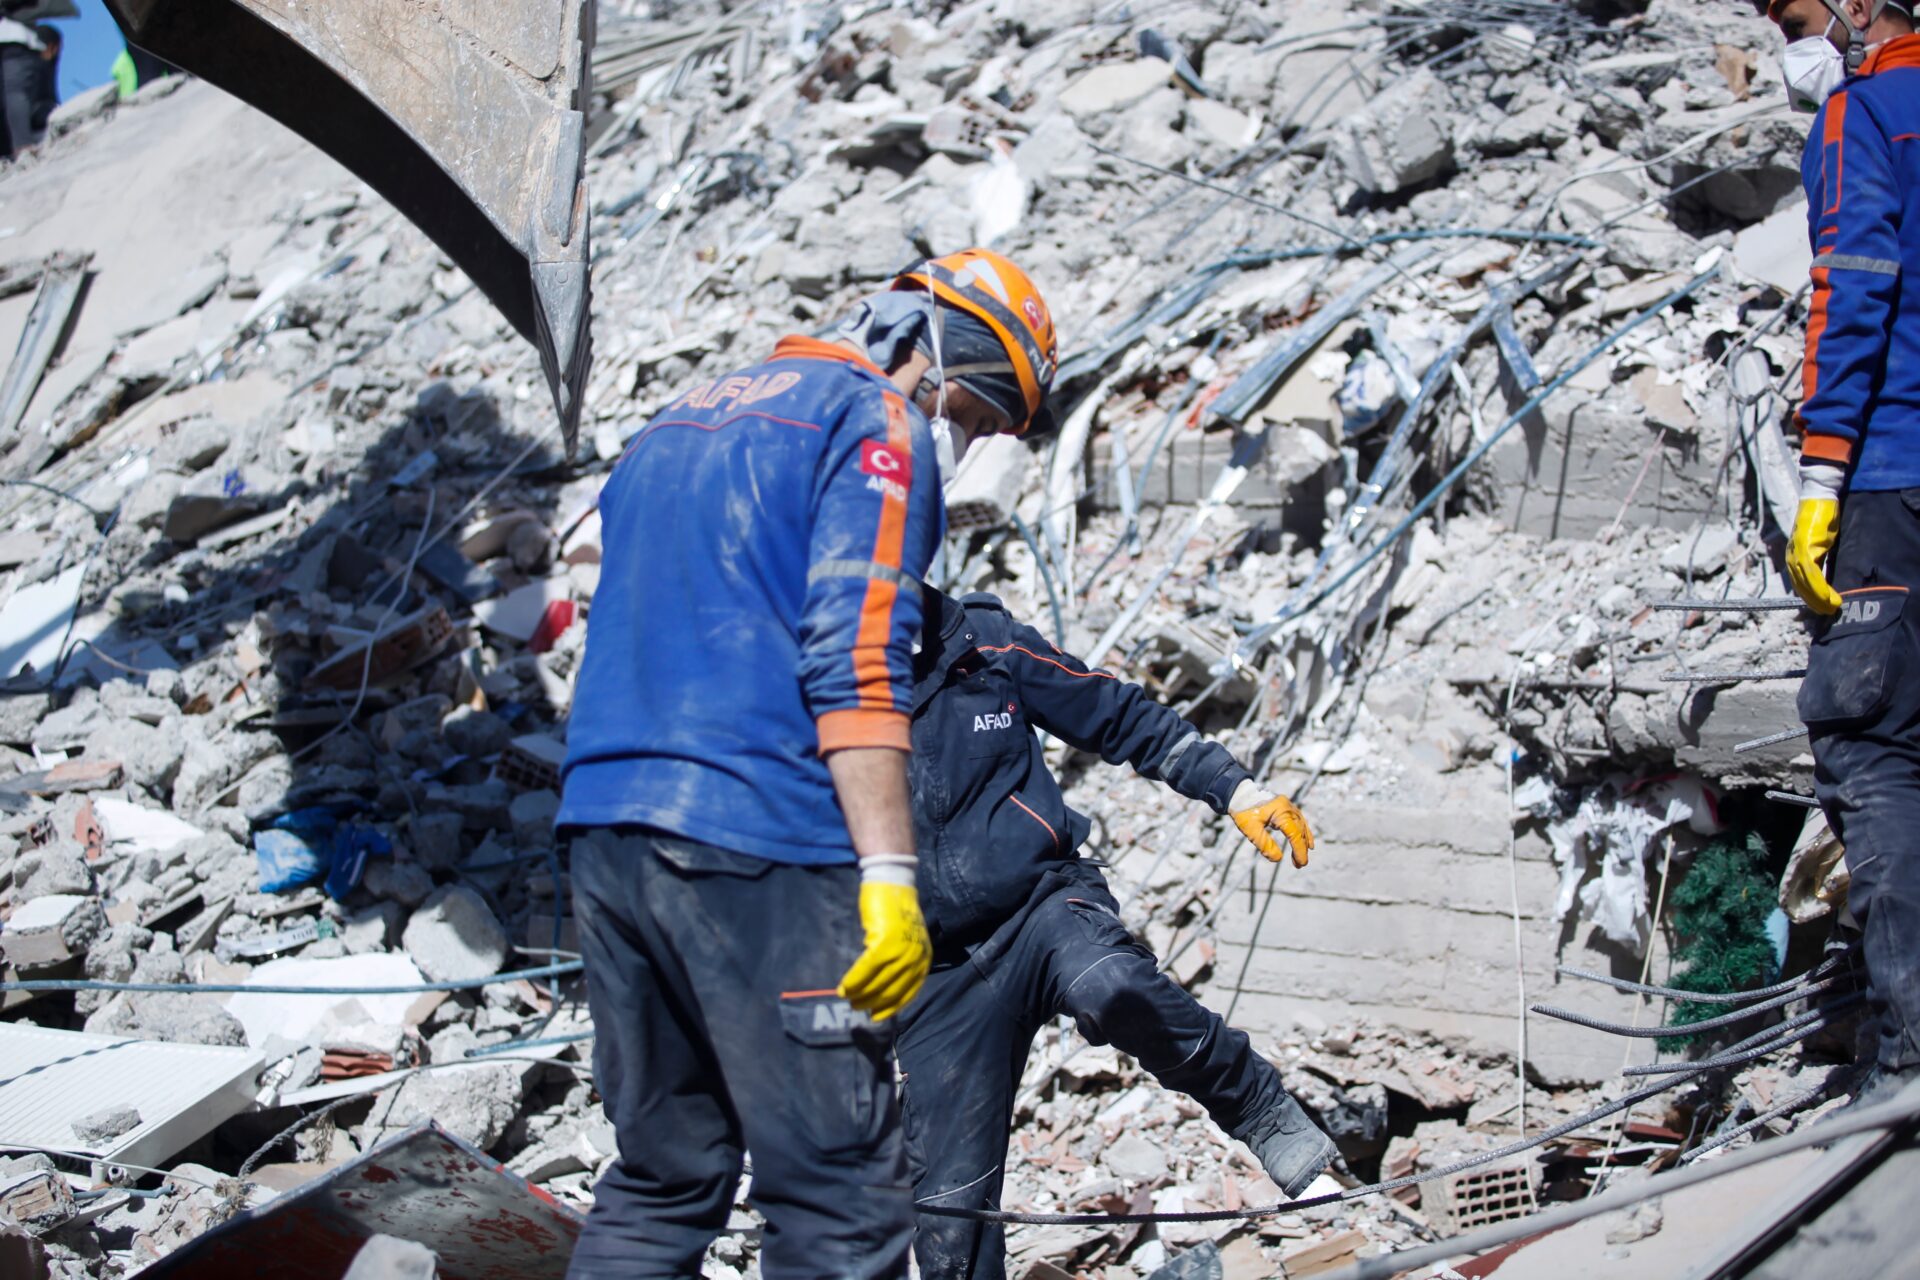 The death toll from the earthquakes in Turkey and Syria rises to more than 12,000